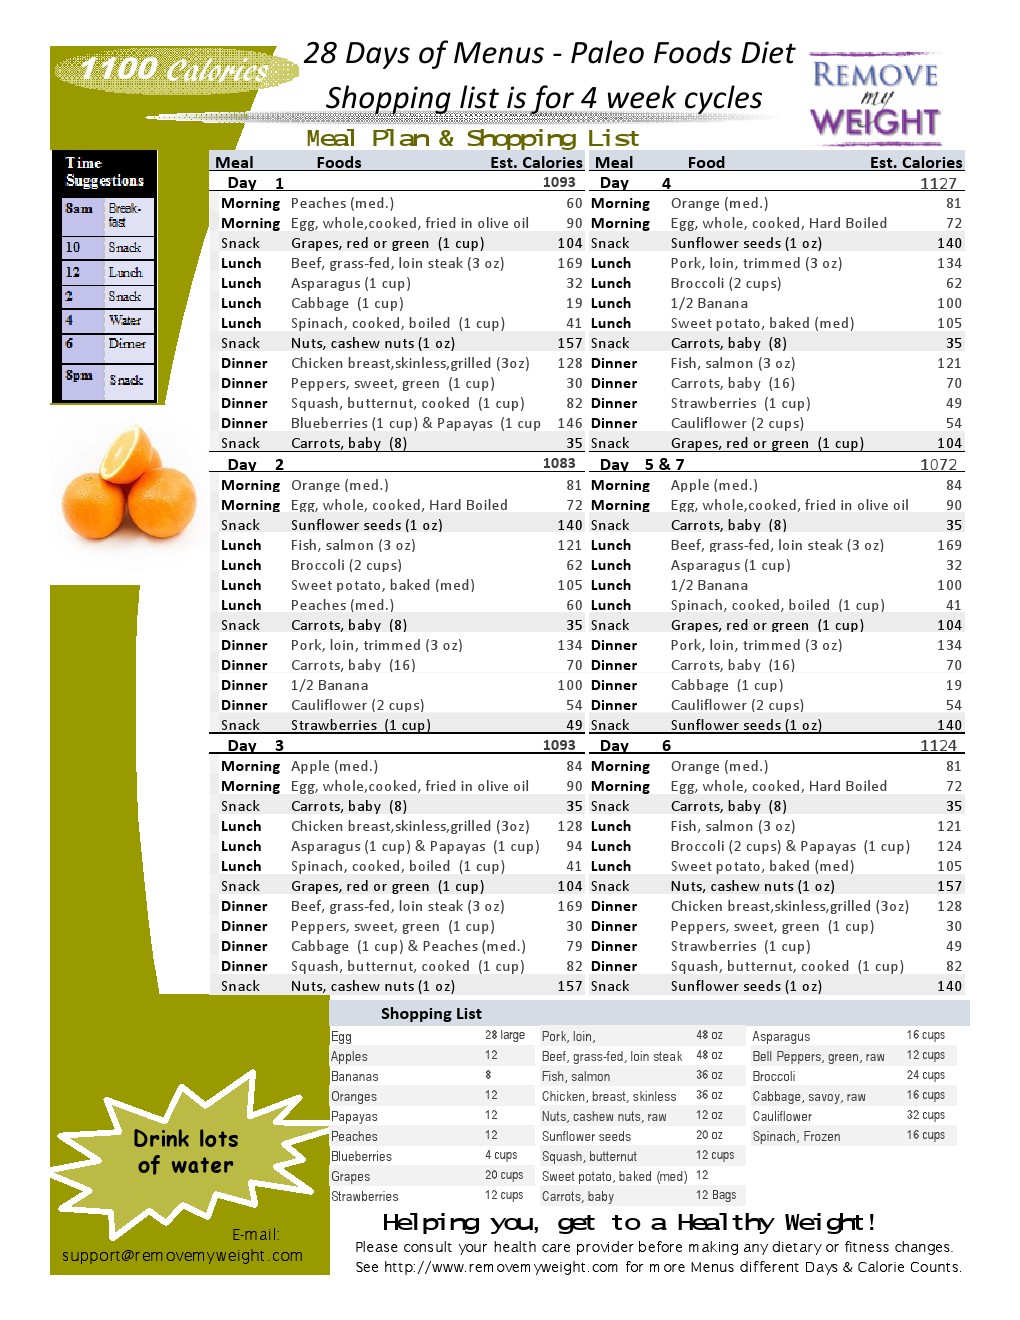 free-1100-calories-a-day-28-day-paleo-diet-with-shopping-list-printable-menu-plan-for-weight